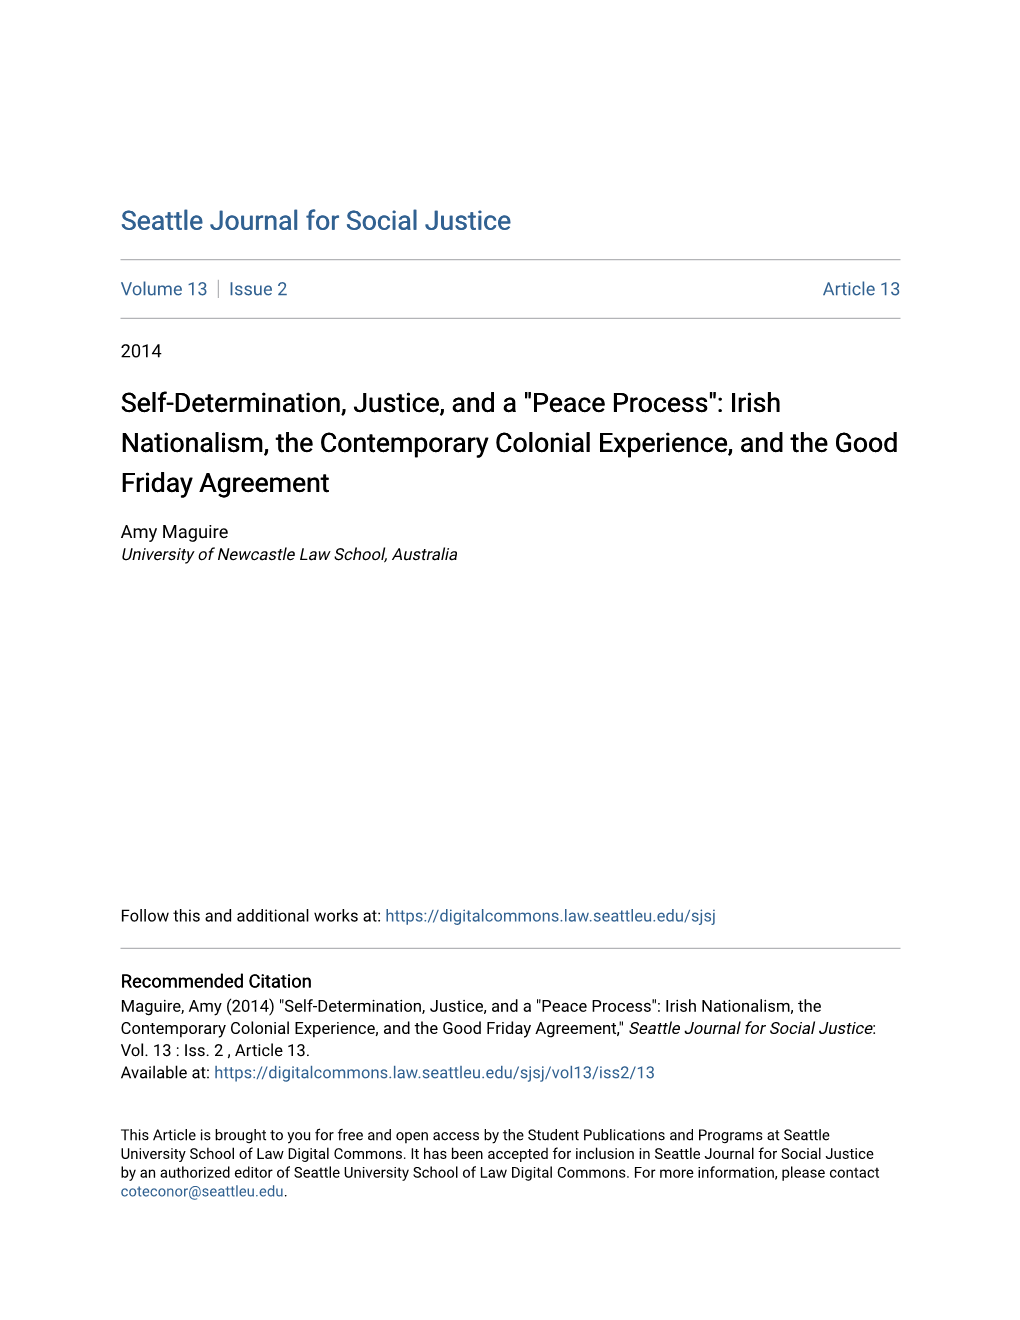 Self-Determination, Justice, and a "Peace Process": Irish Nationalism, the Contemporary Colonial Experience, and the Good Friday Agreement